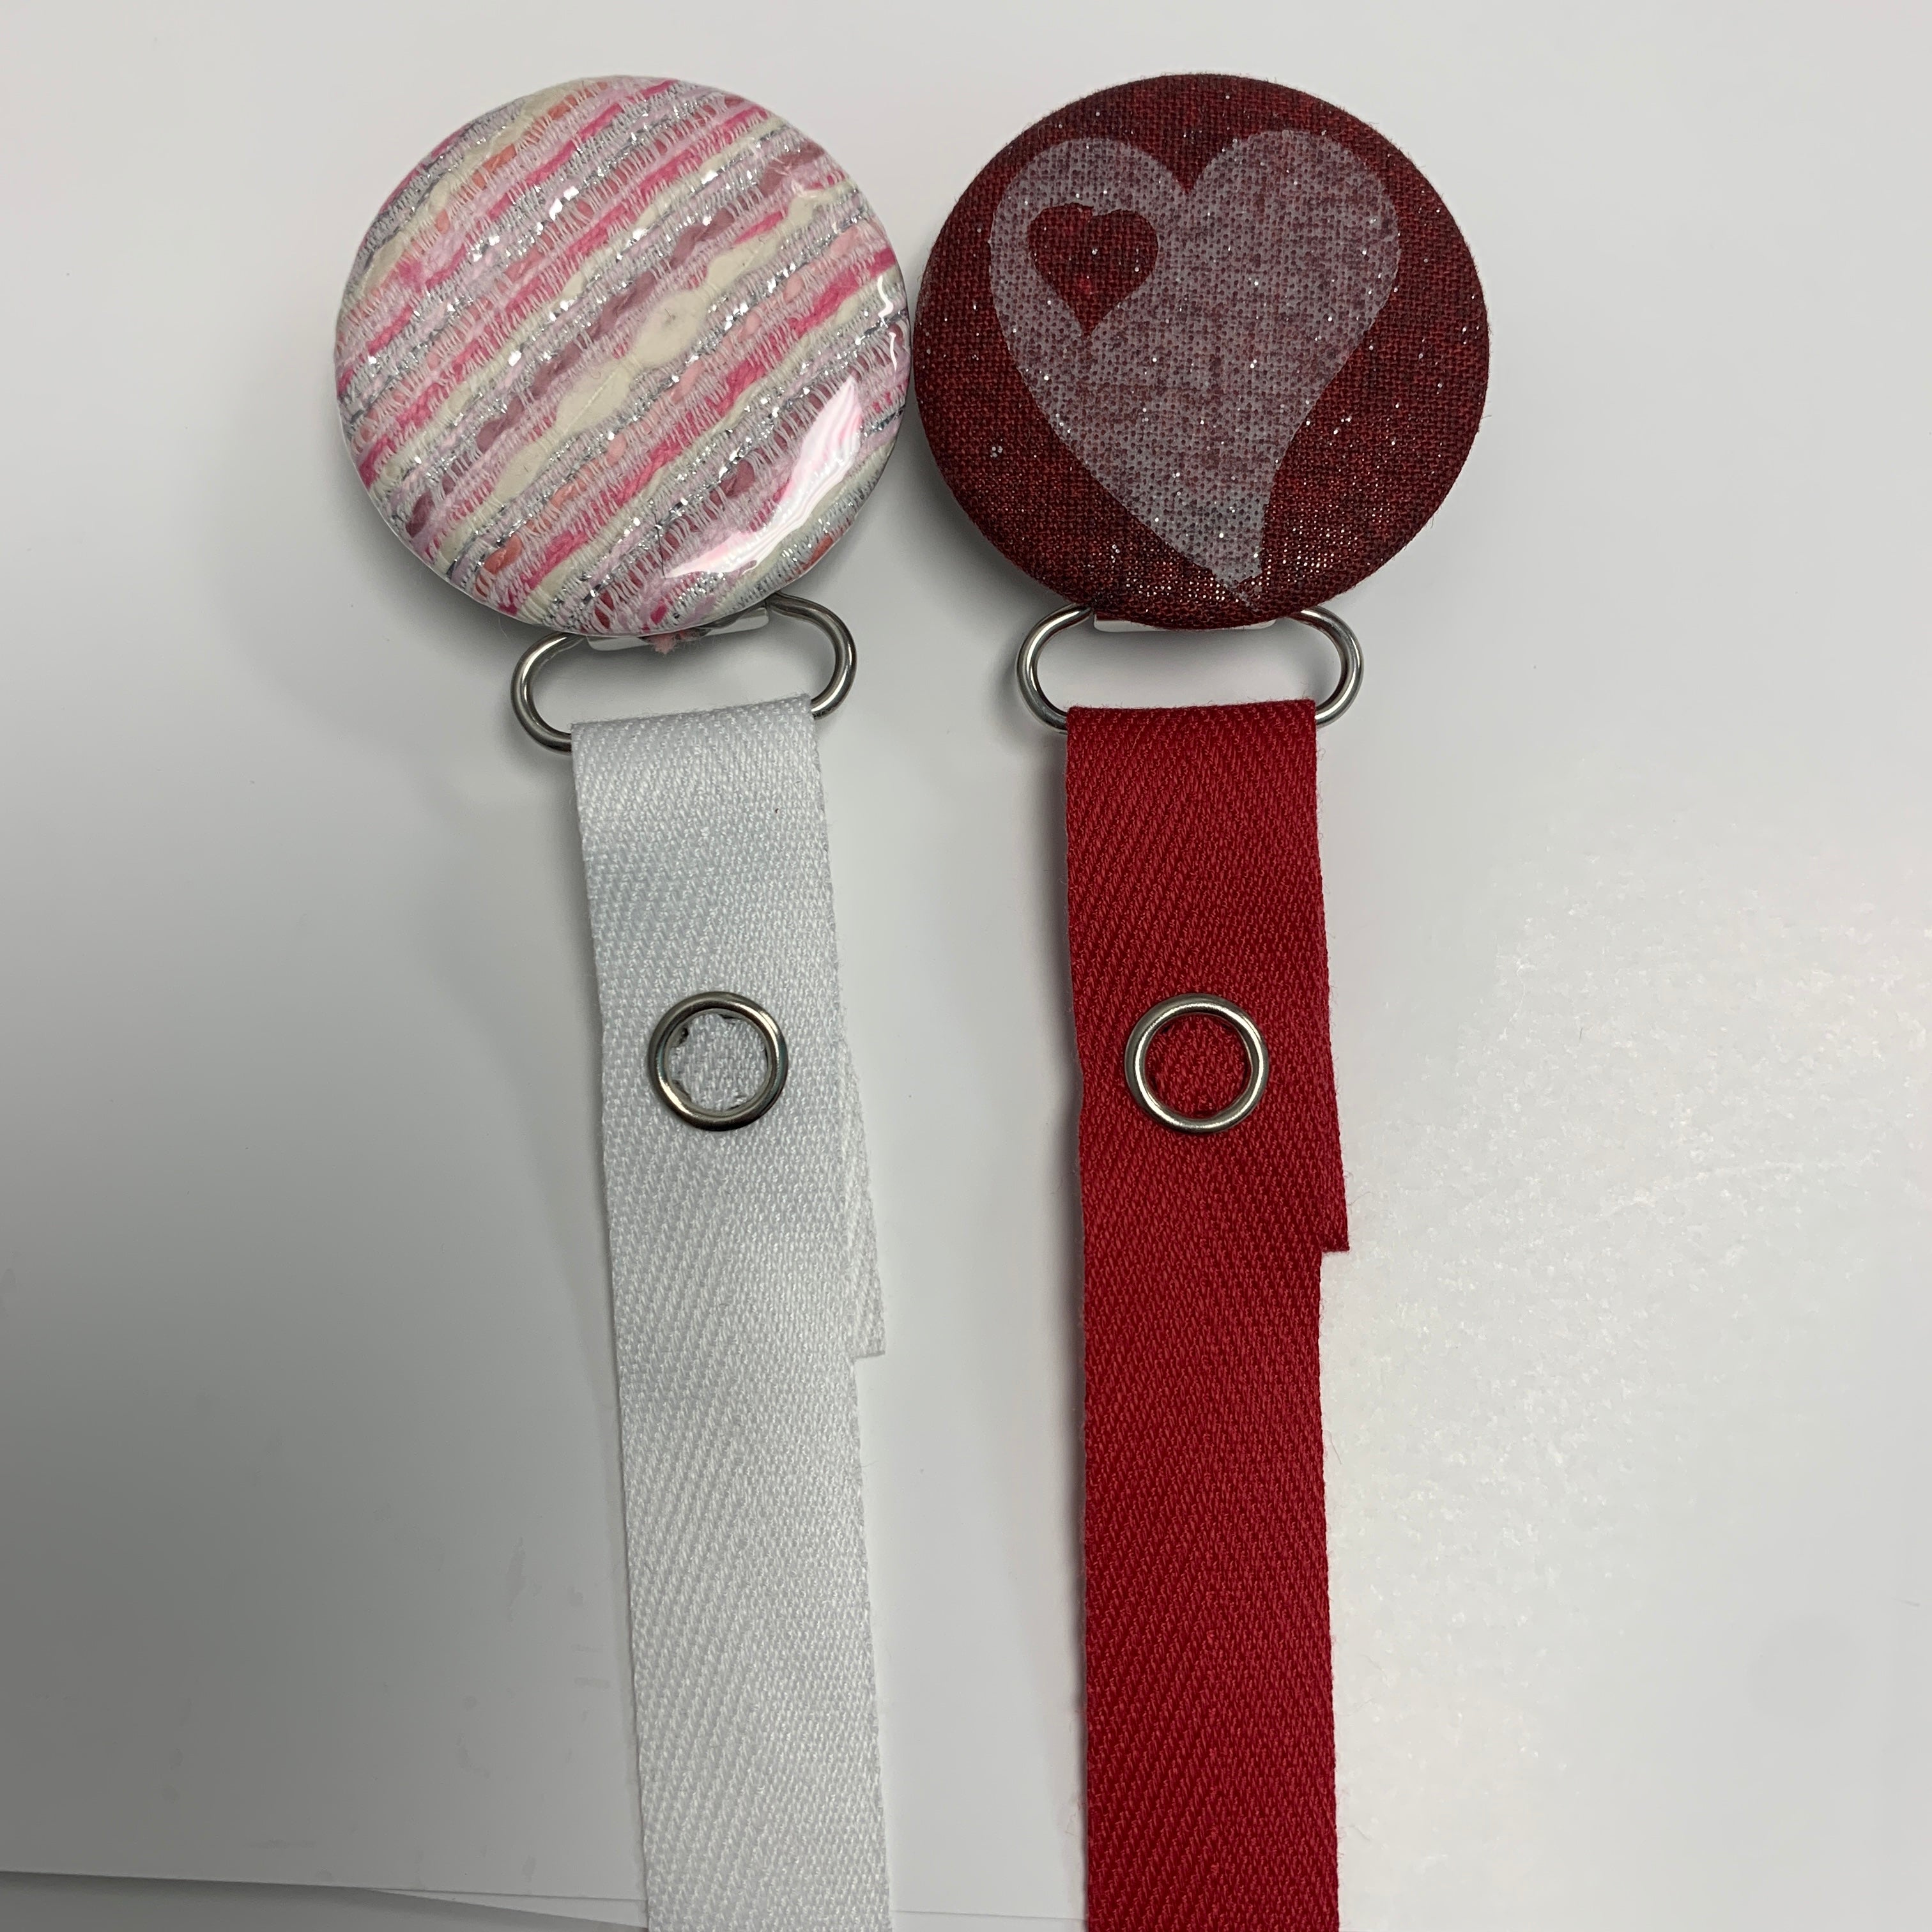 Clearance pacifier clips 2 for $10 Summer Styles